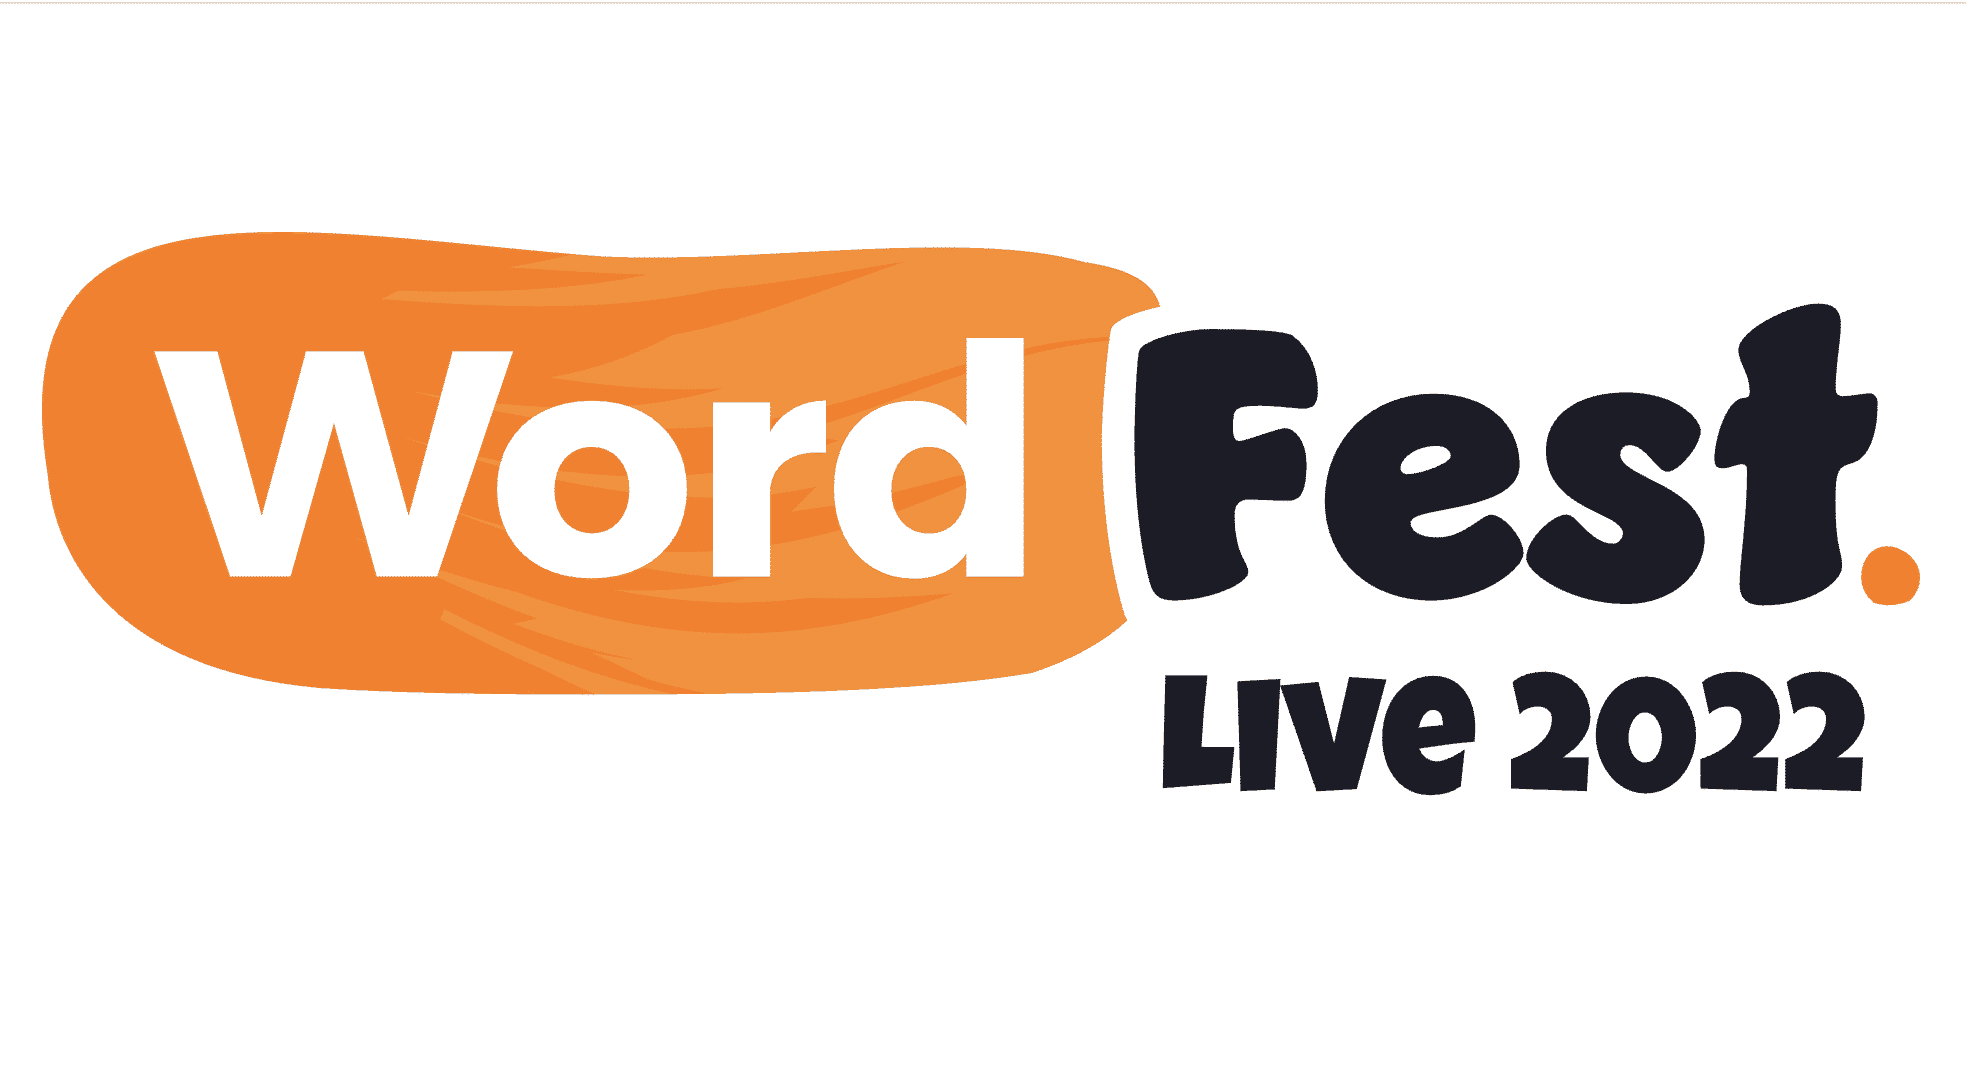 wordfest-live-to-host-free-24-hour-festival-of-wordpress-march-4-2022 WordFest Live to Host Free 24-Hour Festival of WordPress 2022 年 3 月 4 日